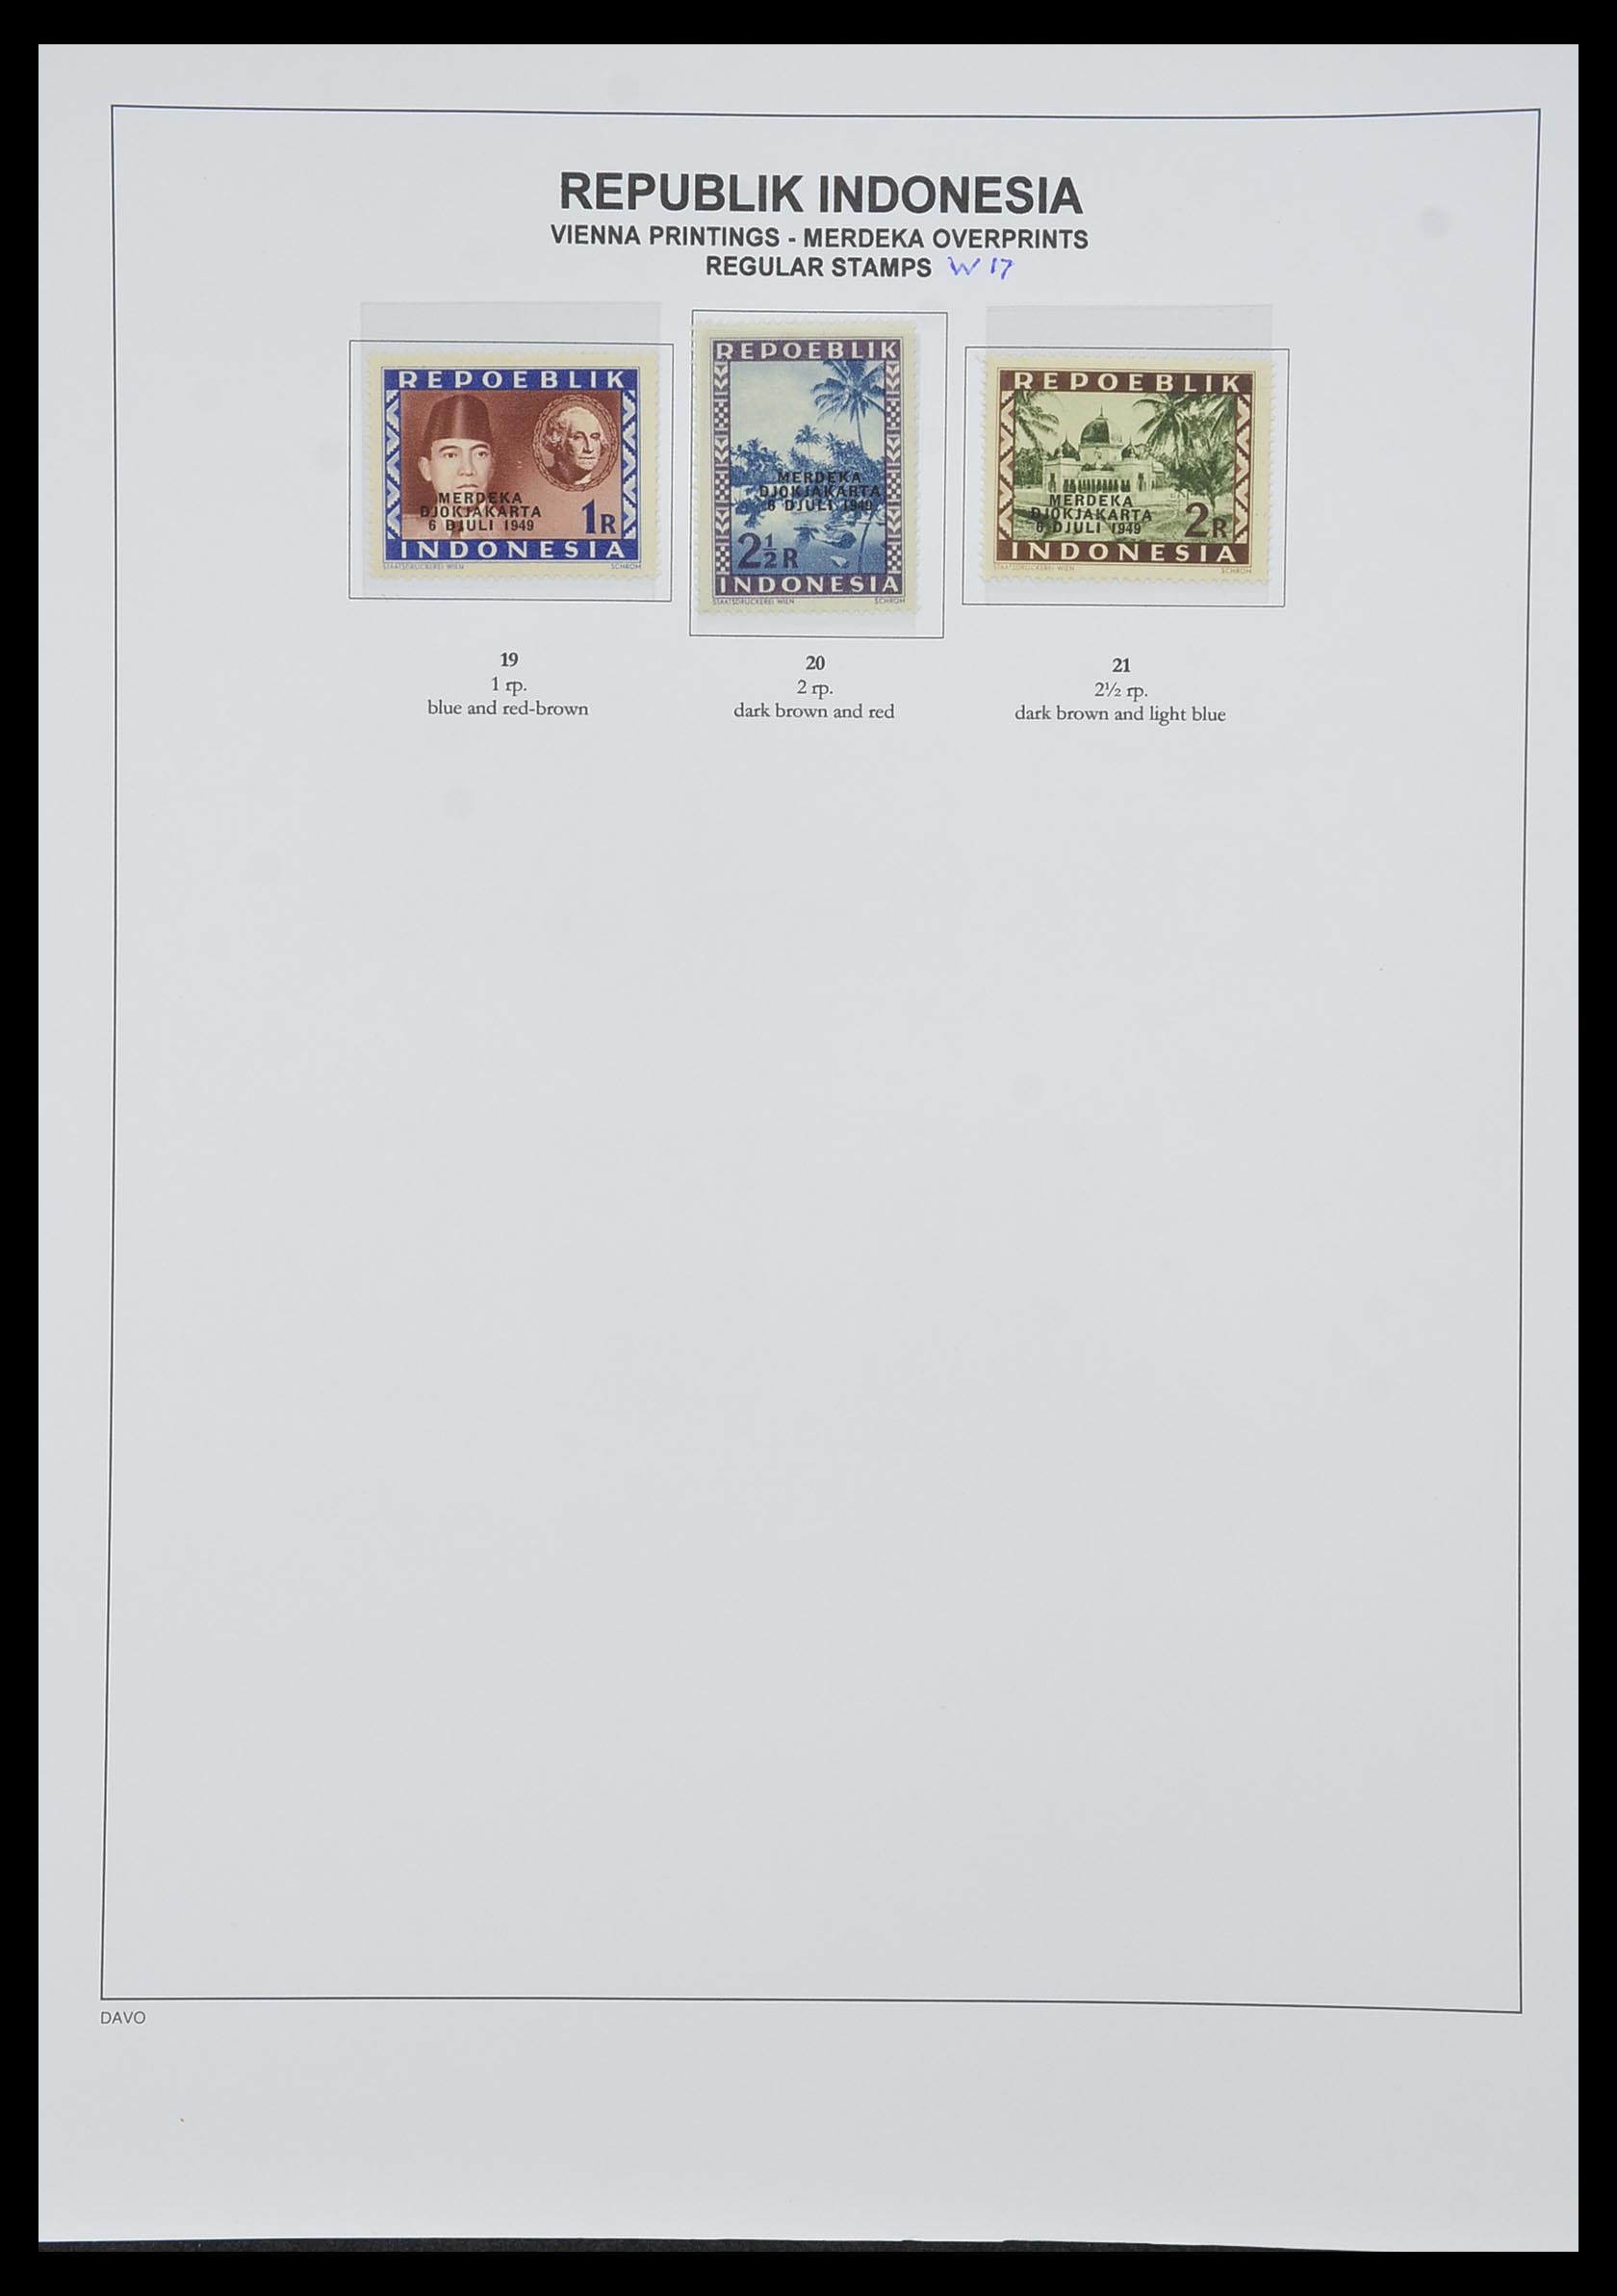 33988 033 - Stamp collection 33988 Vienna printings Indonesia.